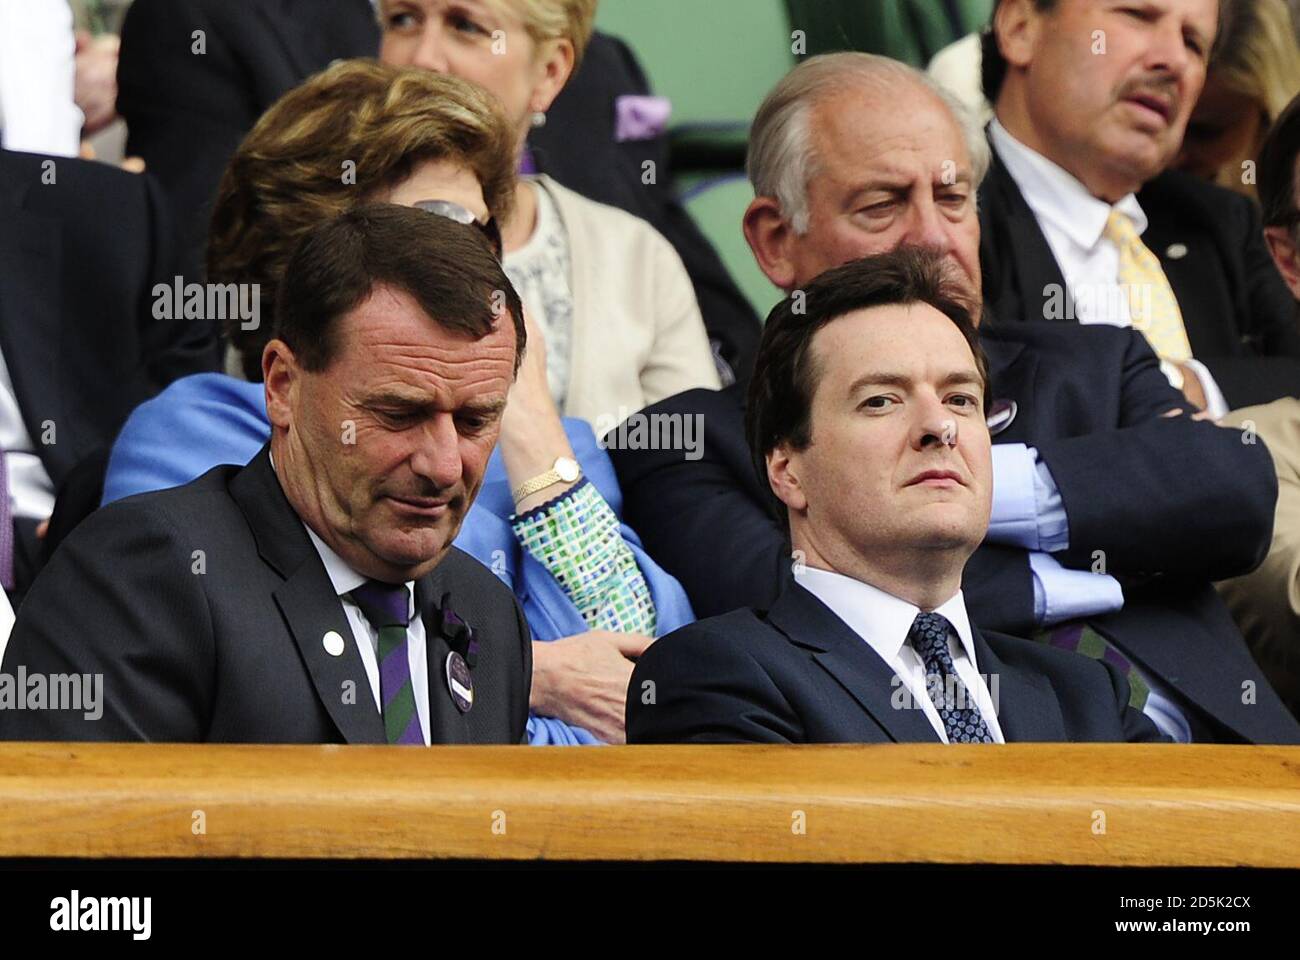 Chancellor of the Exchequer George Osborne and All England Club chairman Philip Brook watch the match between Switzerland's Roger Federer and France's Jo Wilfried Tsonga from the royal box on day nine of the 2011 Wimbledon Championships at the All England Lawn Tennis and Croquet Club, Wimbledon. Stock Photo